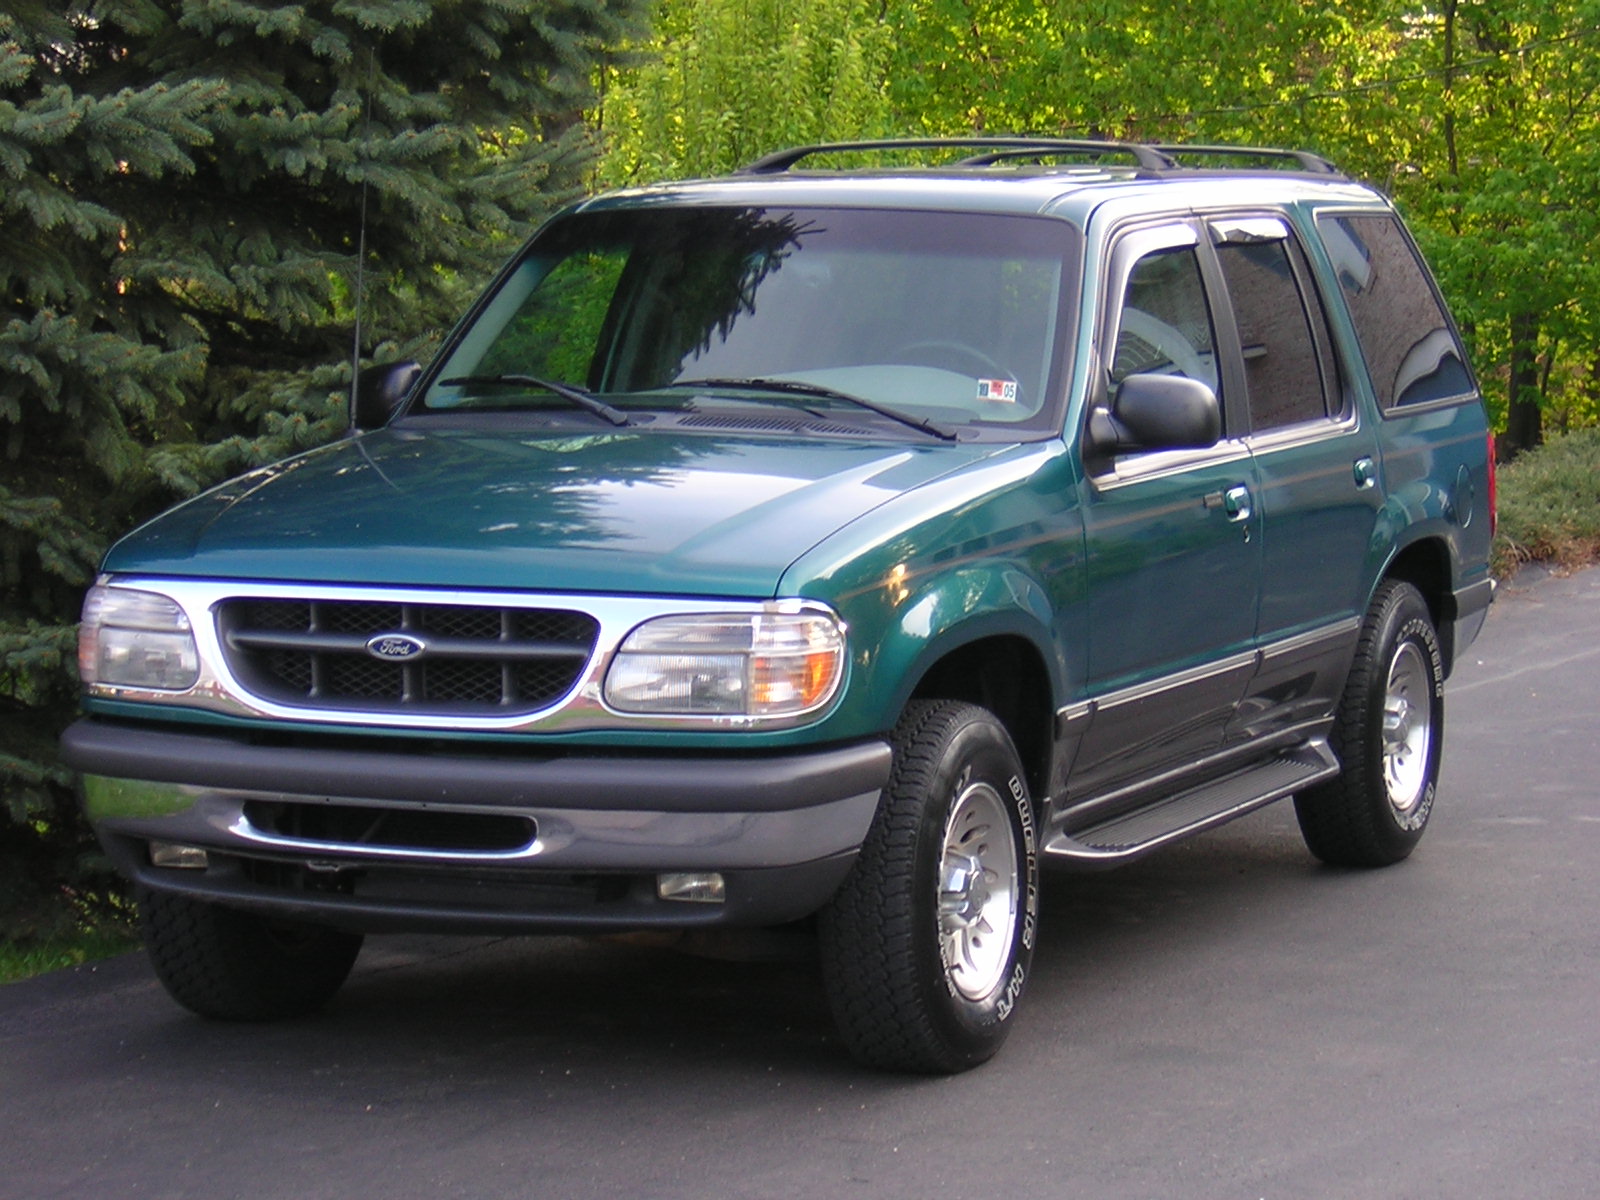 1998 Ford explorer sport specifications #4